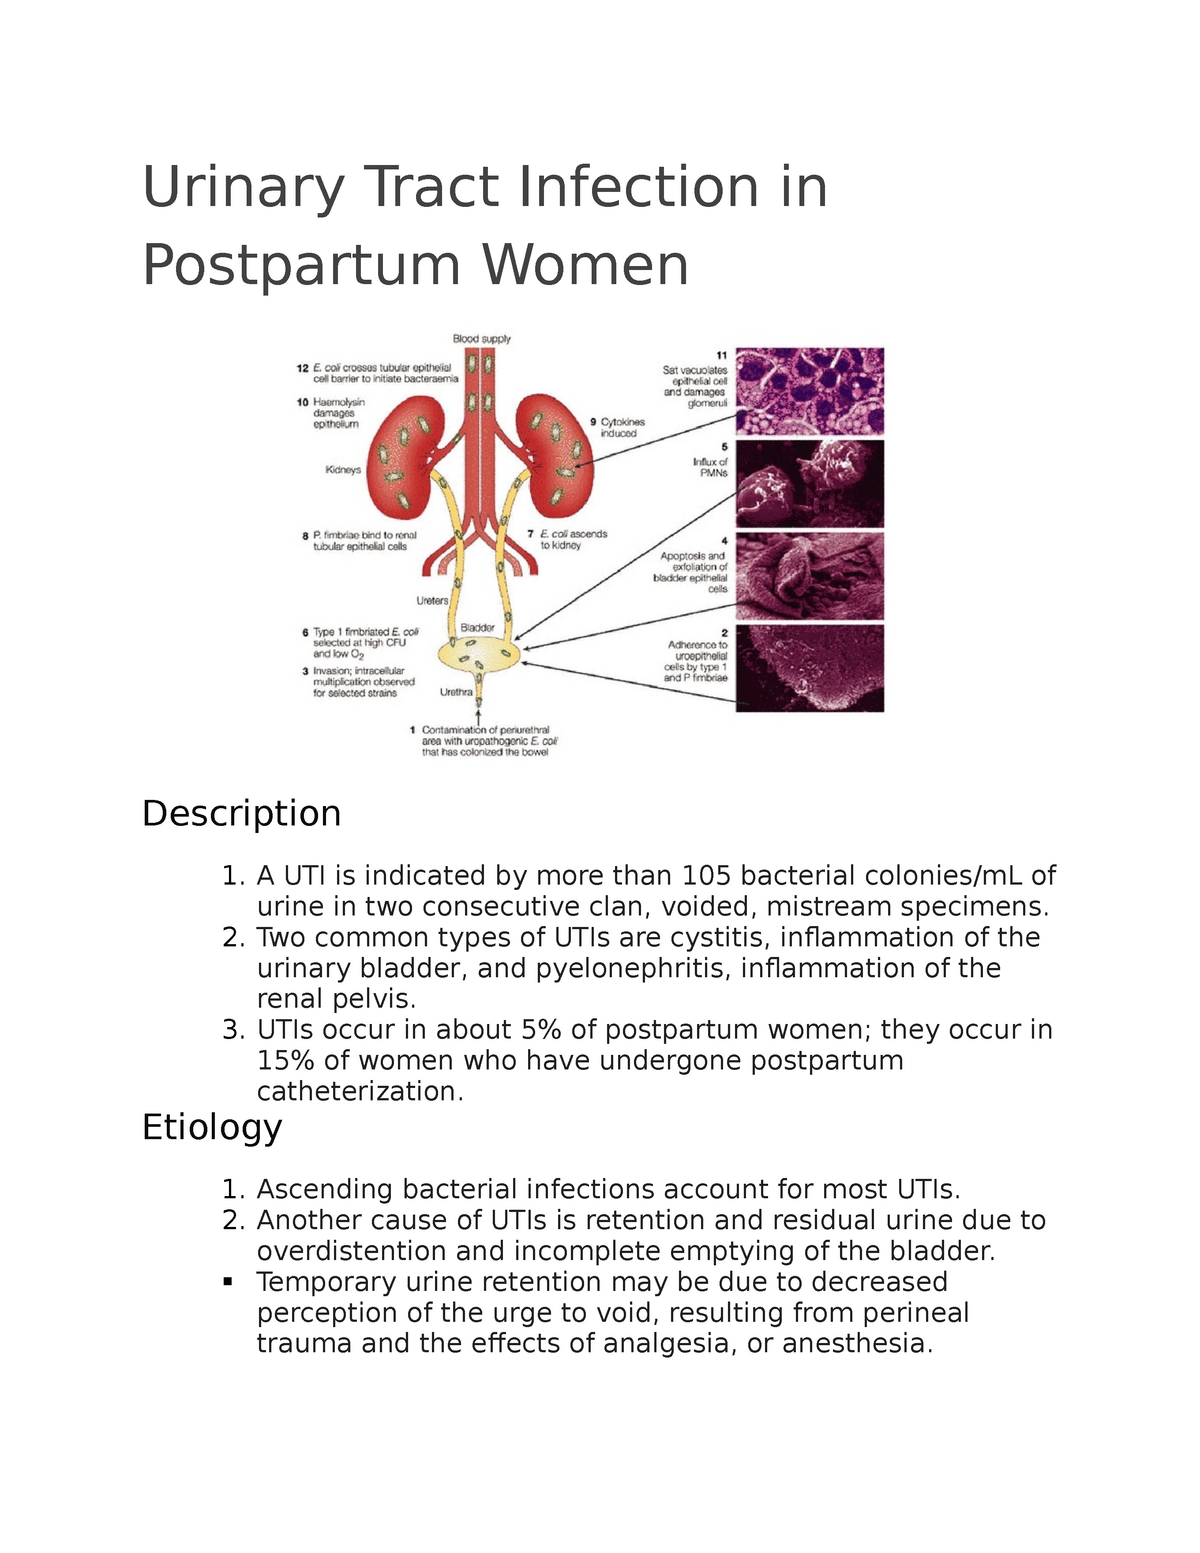 Postpartum urinary tract infection by mode of delivery: a Danish